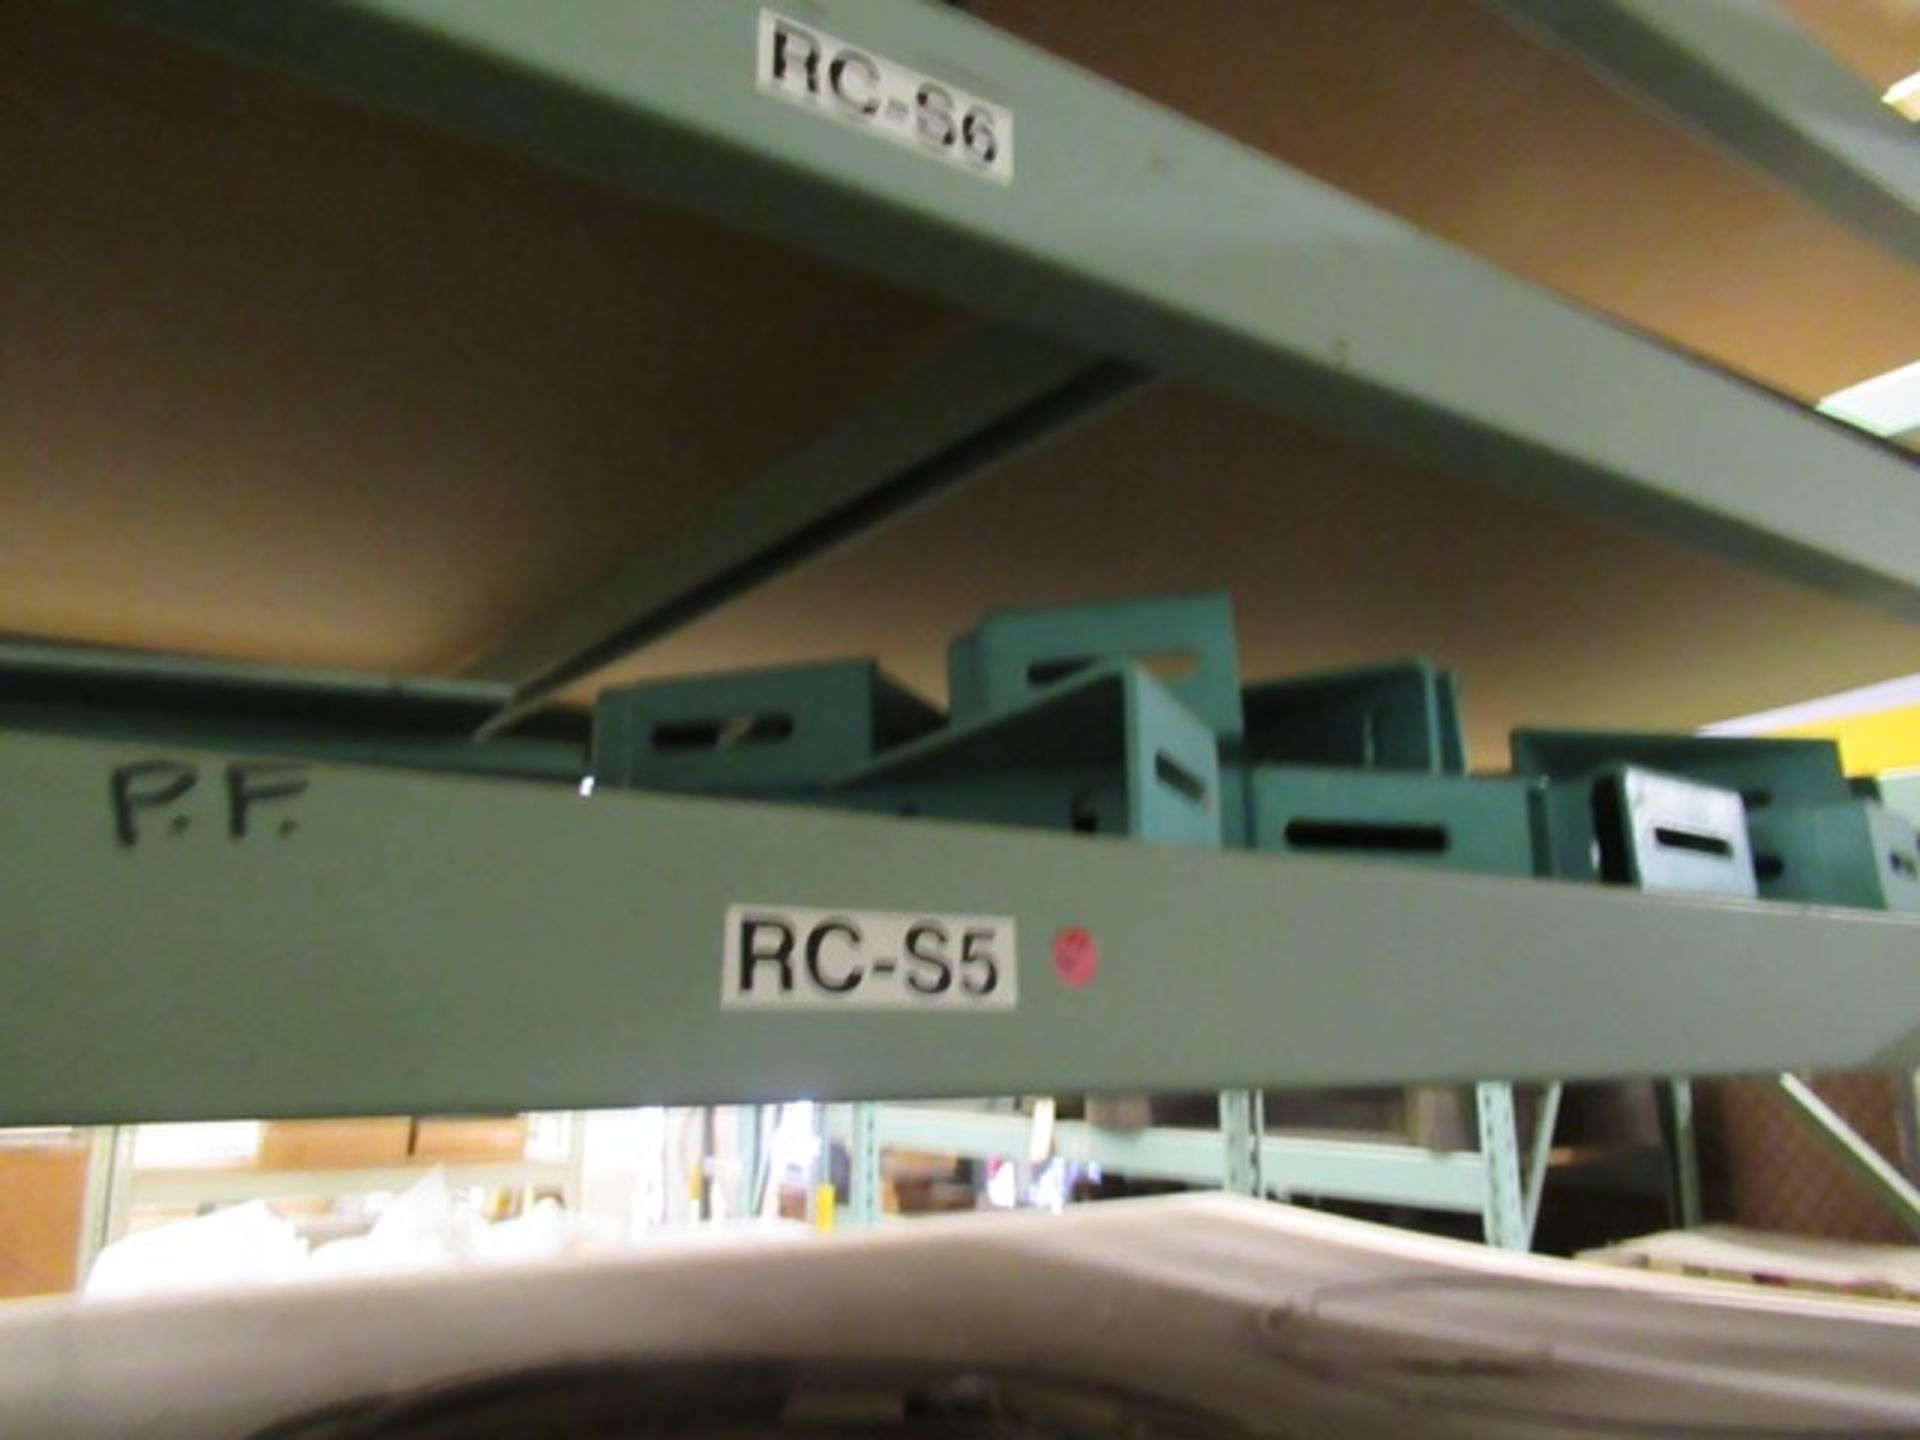 LOT ASST. FILTERS, BAGS, COUPLINGS, ETC. 4 SHELVES ON RACK ONLY (M-S) - Image 6 of 7